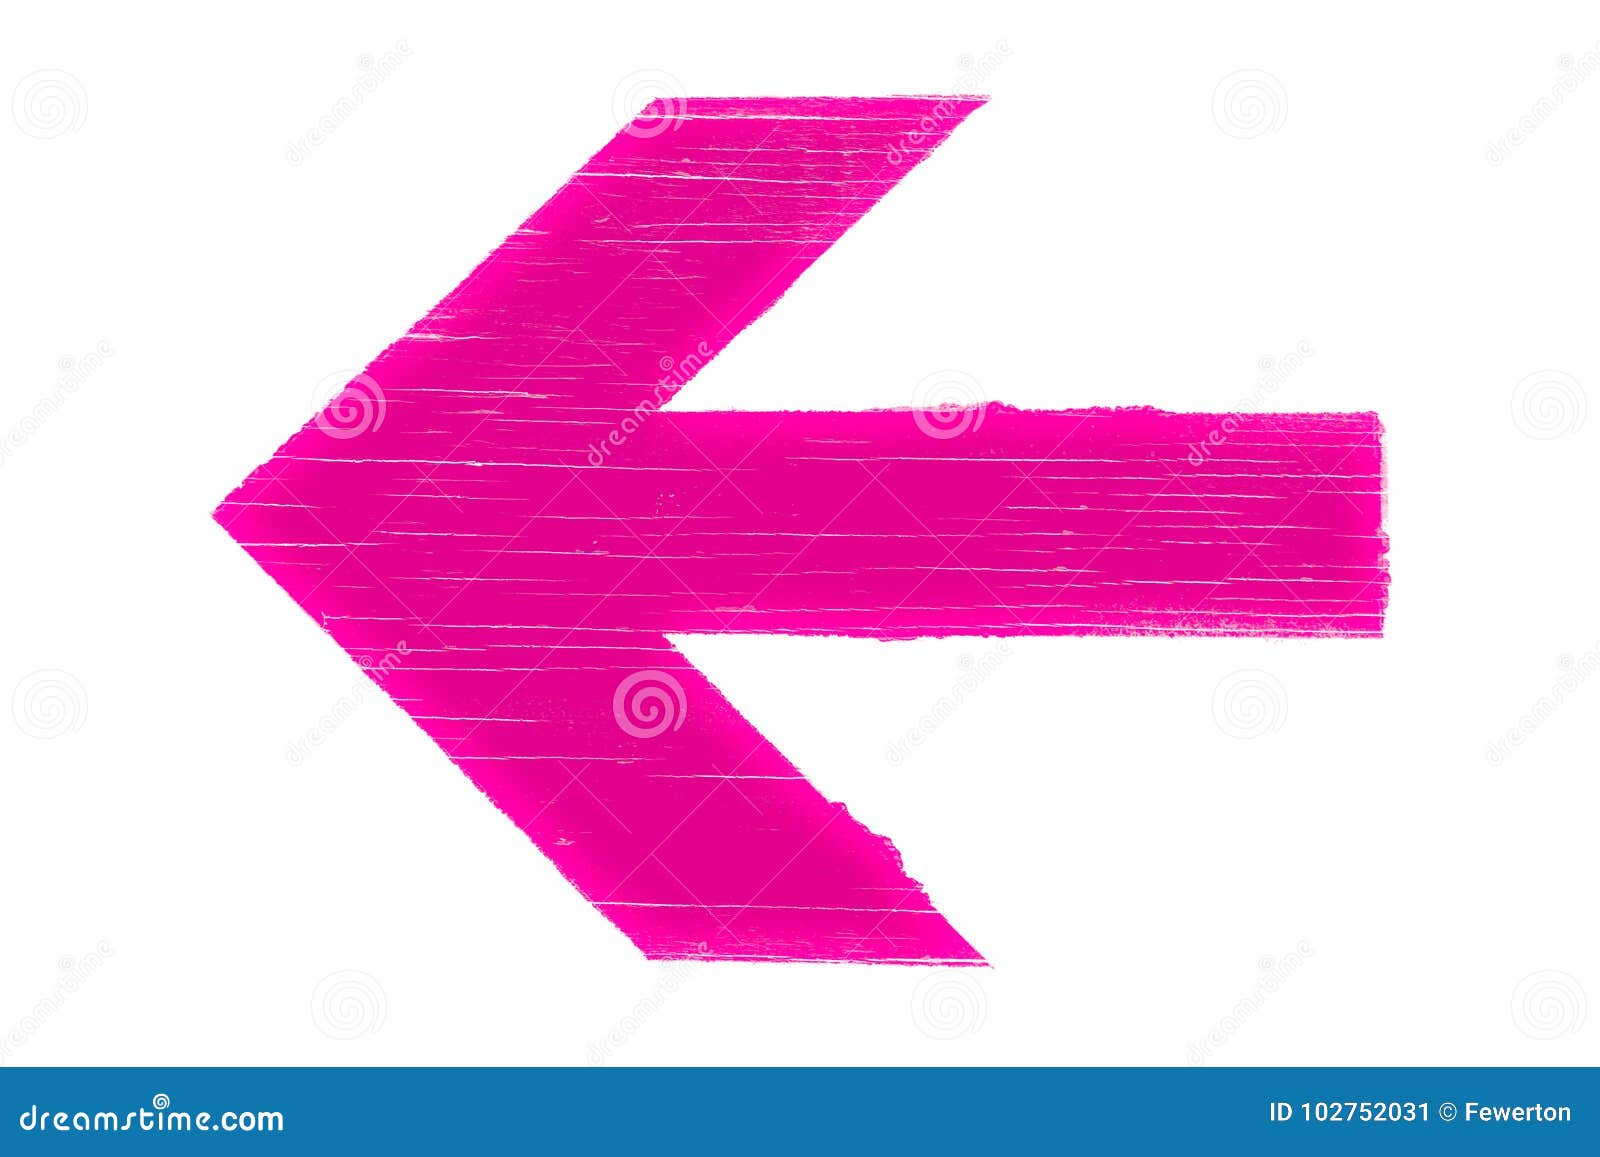 pink arrow manually painted on wooden signboard texture